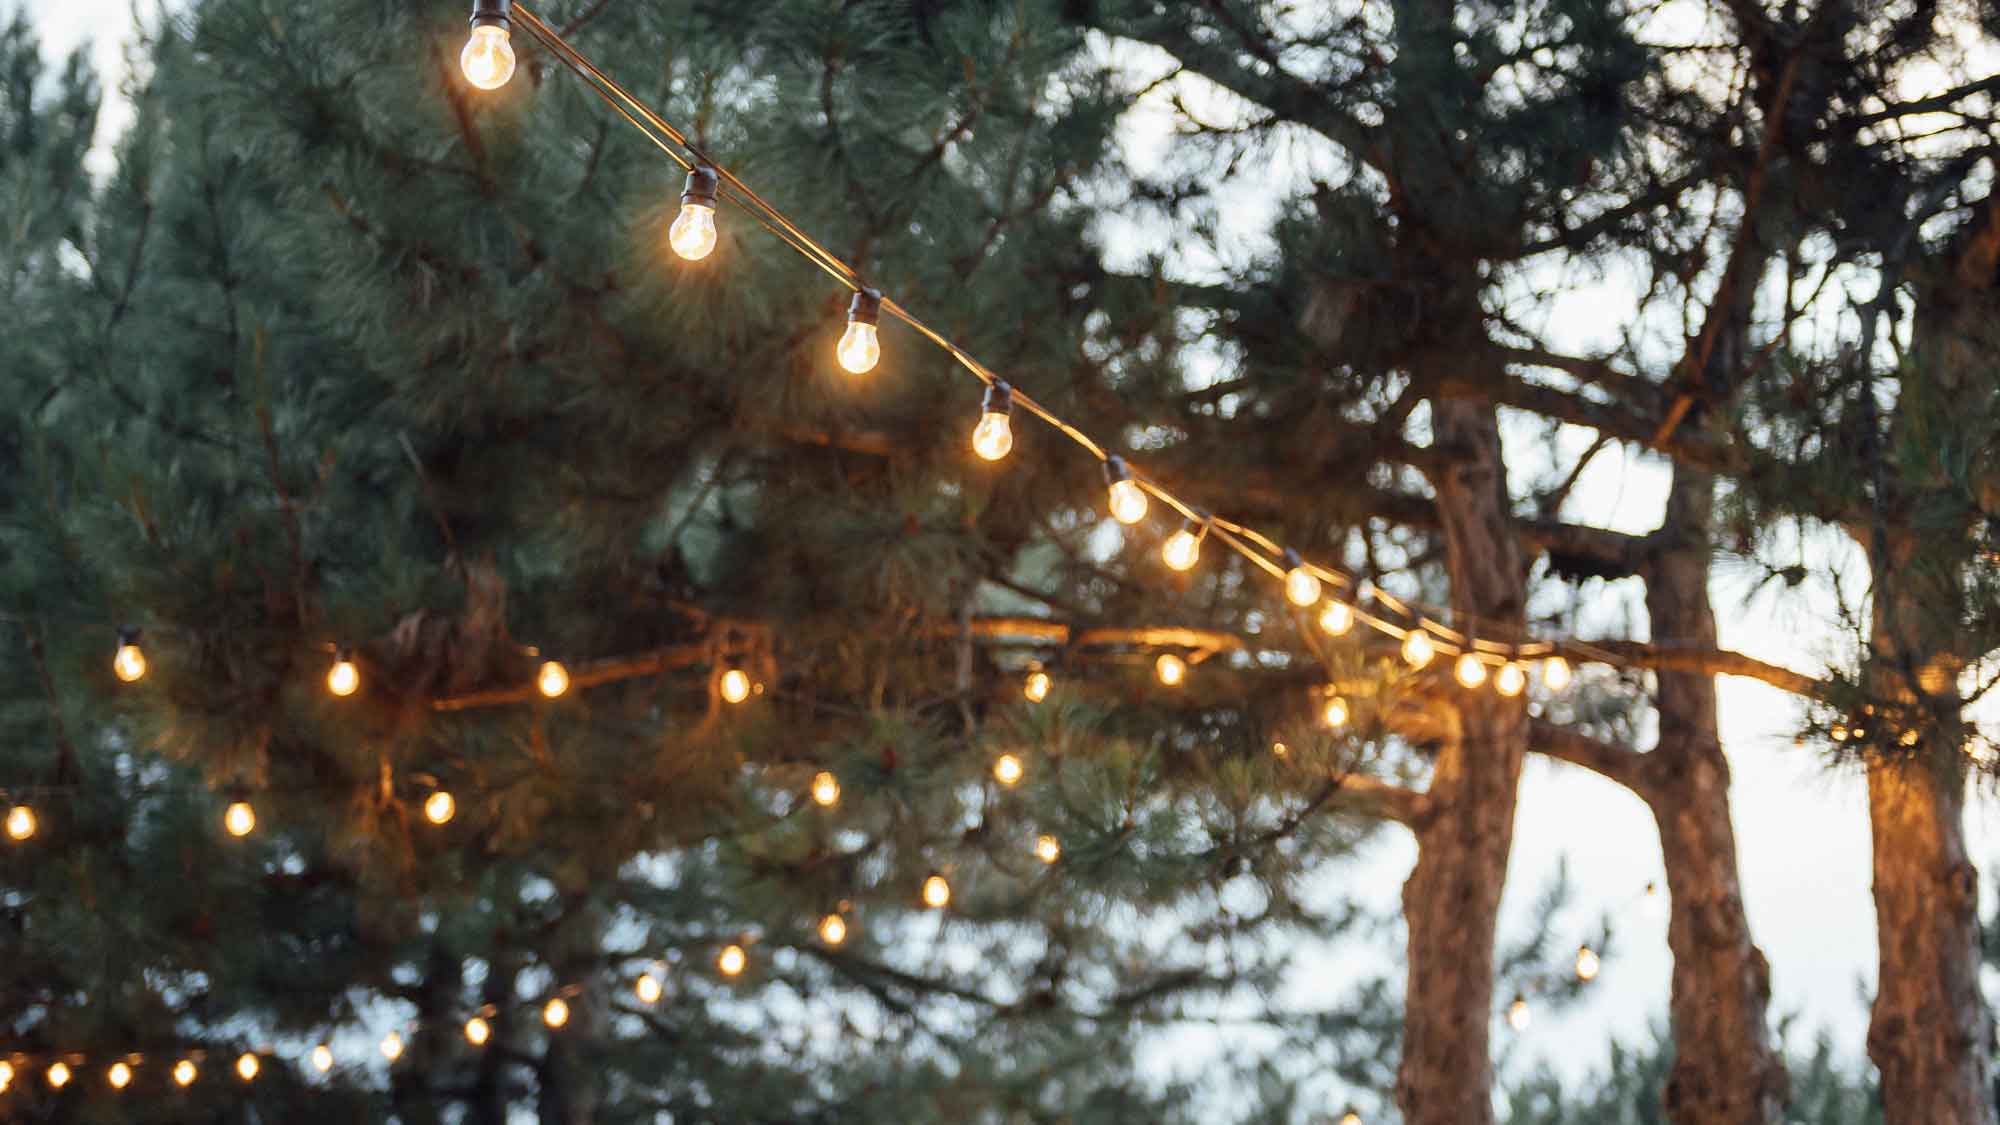 Pine trees with lights hanging on them